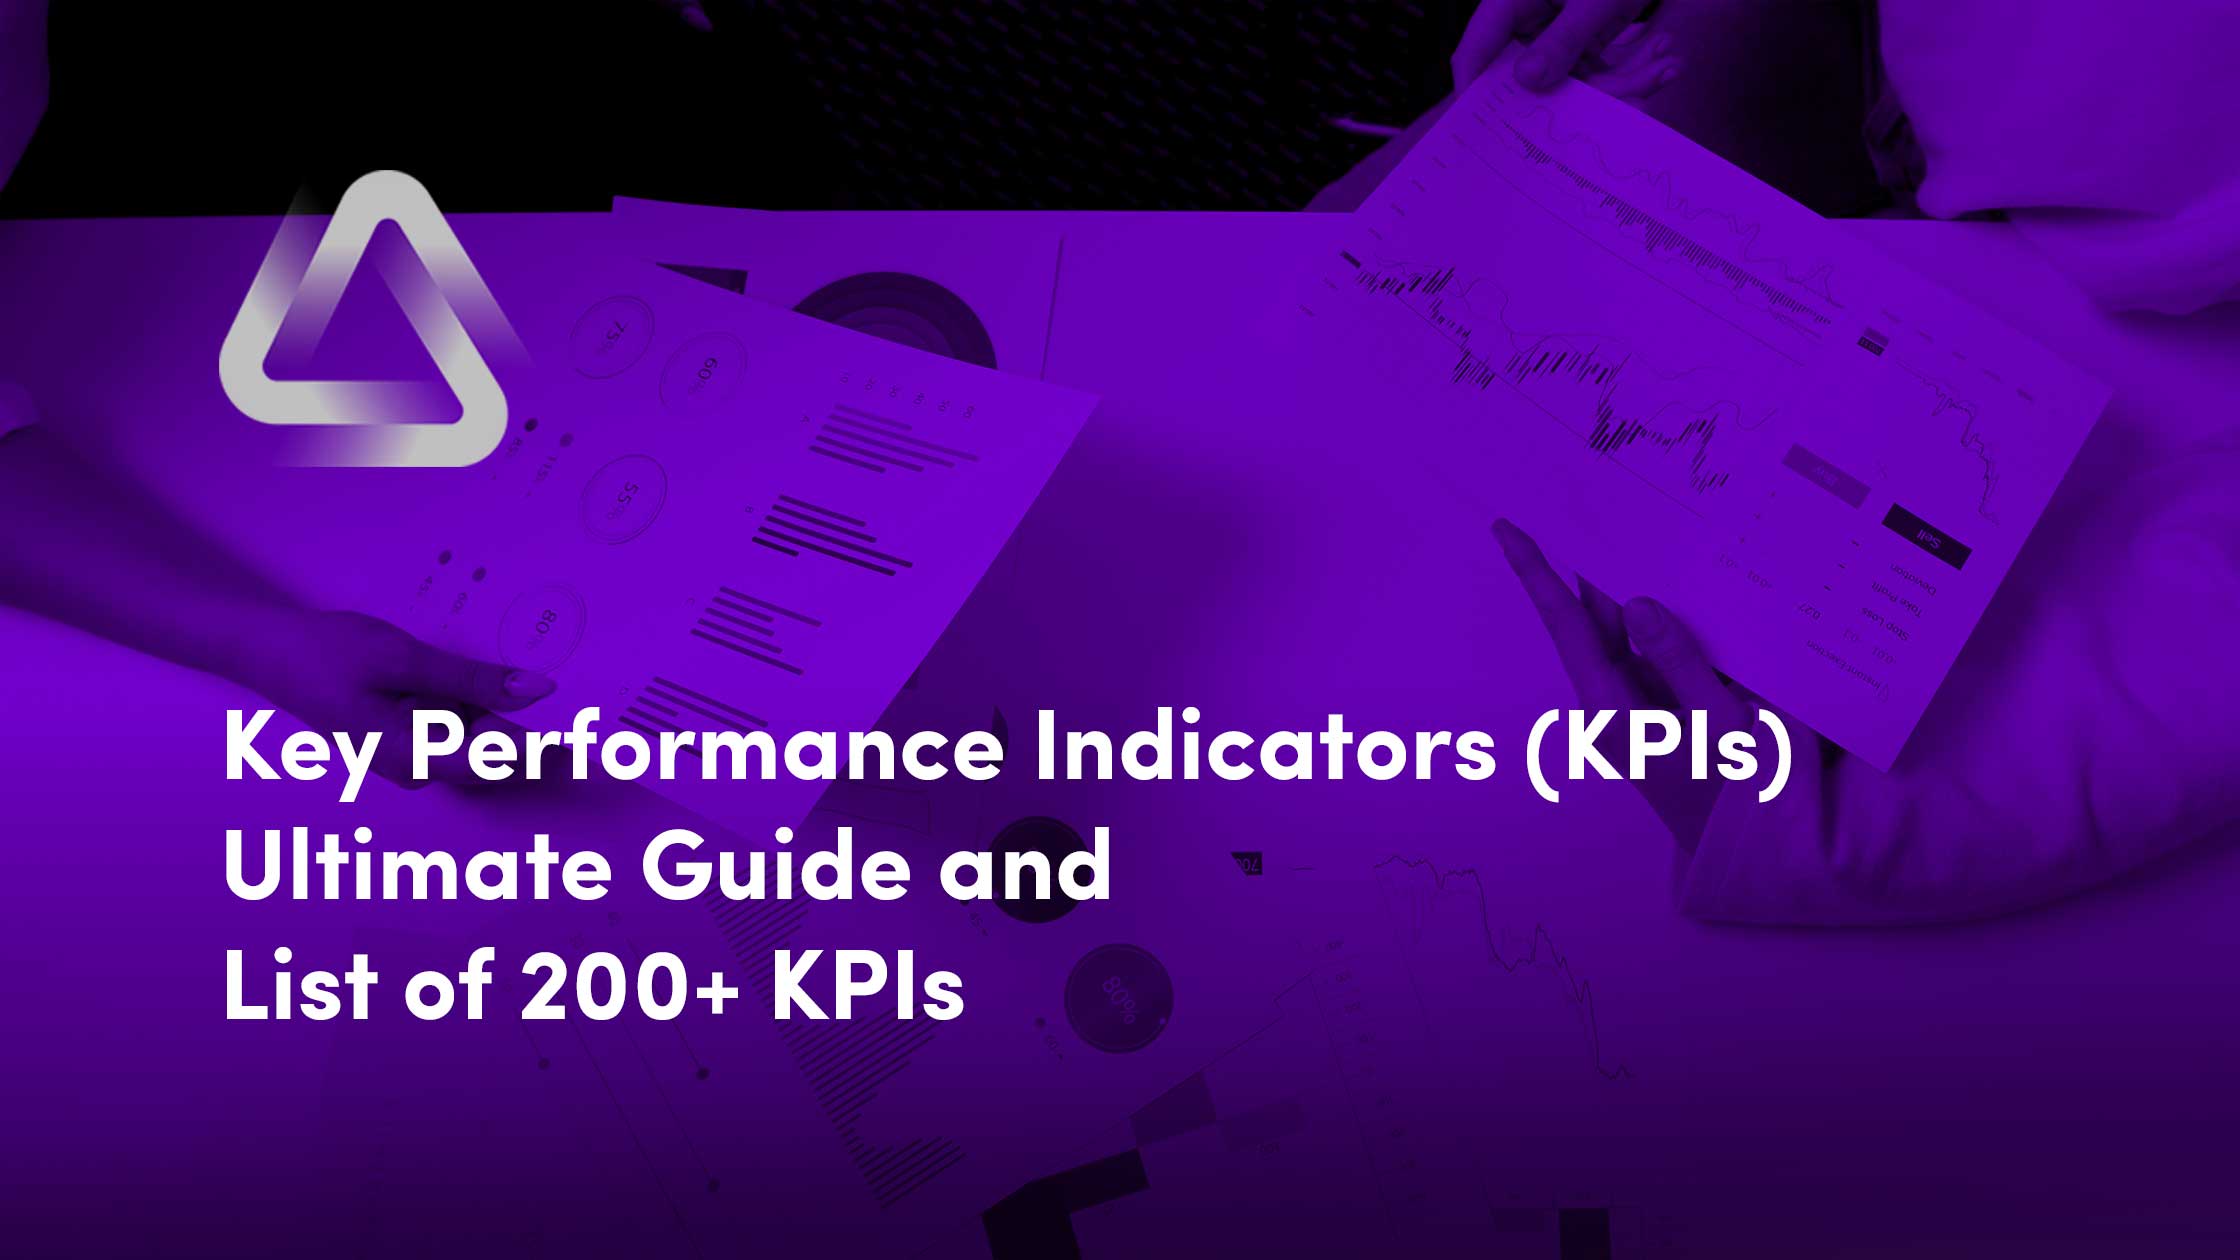 Ultimate Guide on KPIs - Incl. List of 200 KPIs for Businesses